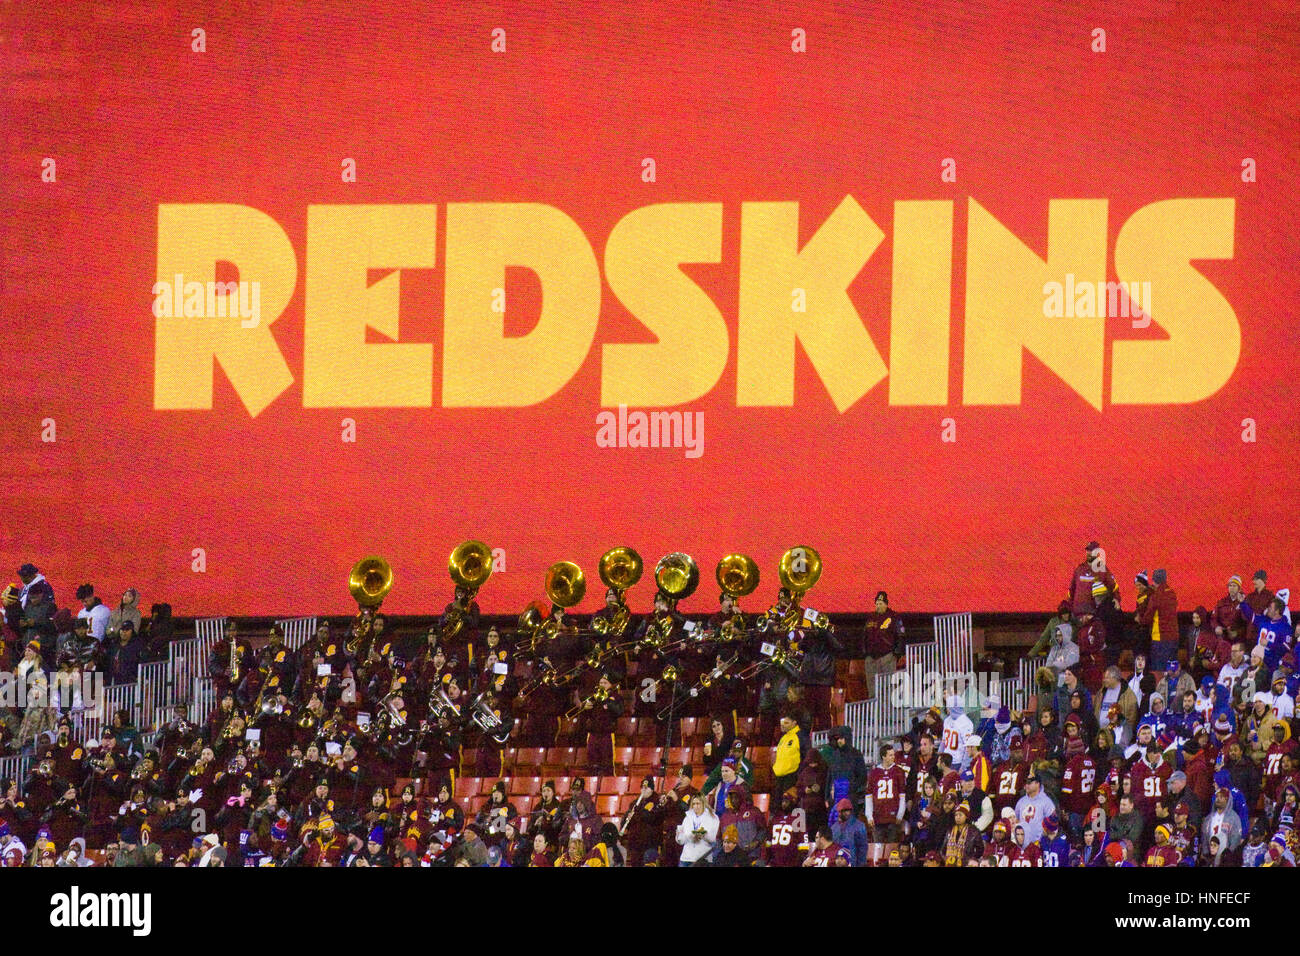 Washington Redskins banner, marching band, and fans at FedEx field stadium. Stock Photo